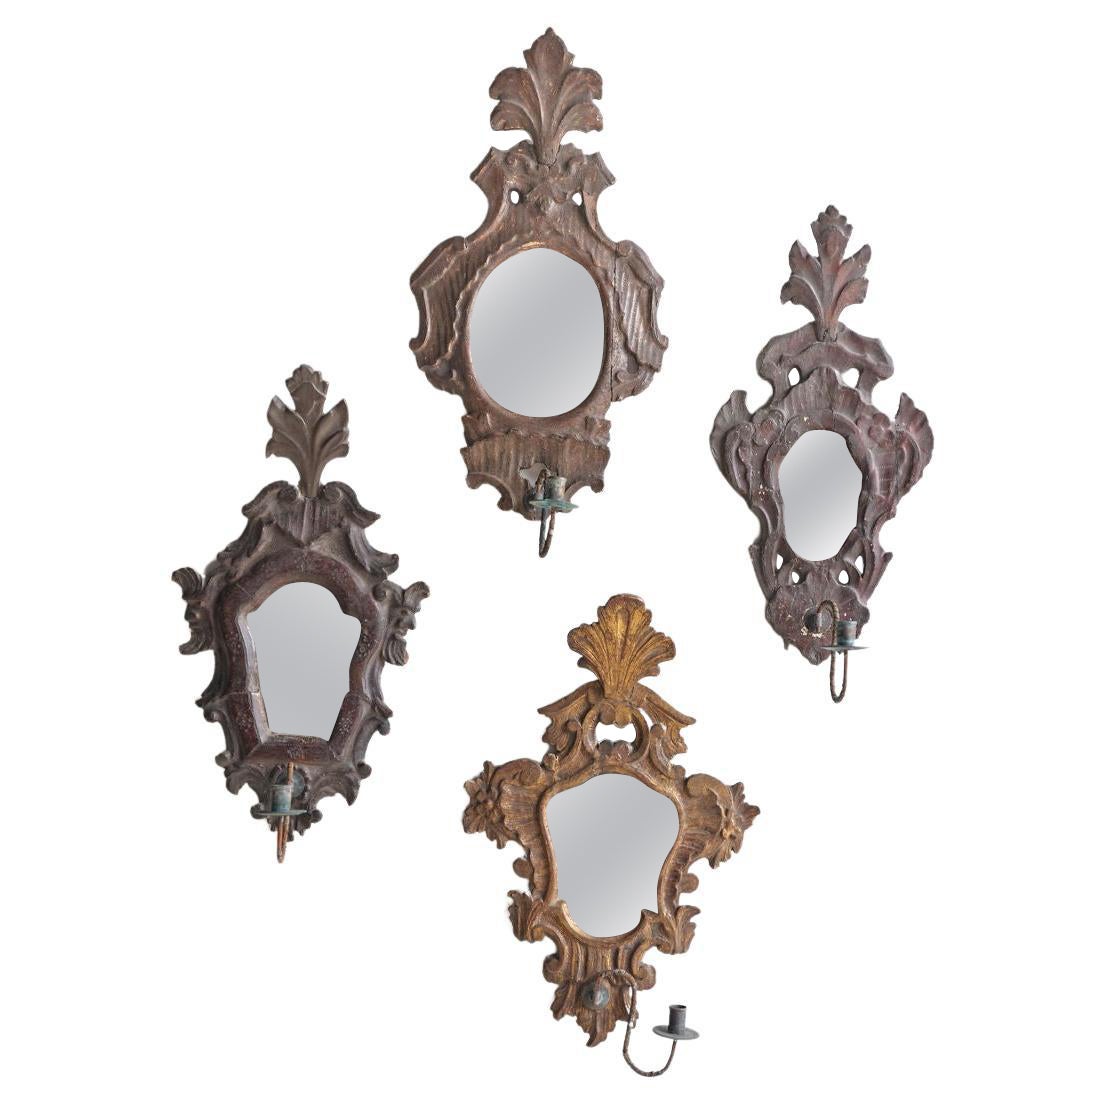 4 Mirrored Wall Sconces For Sale